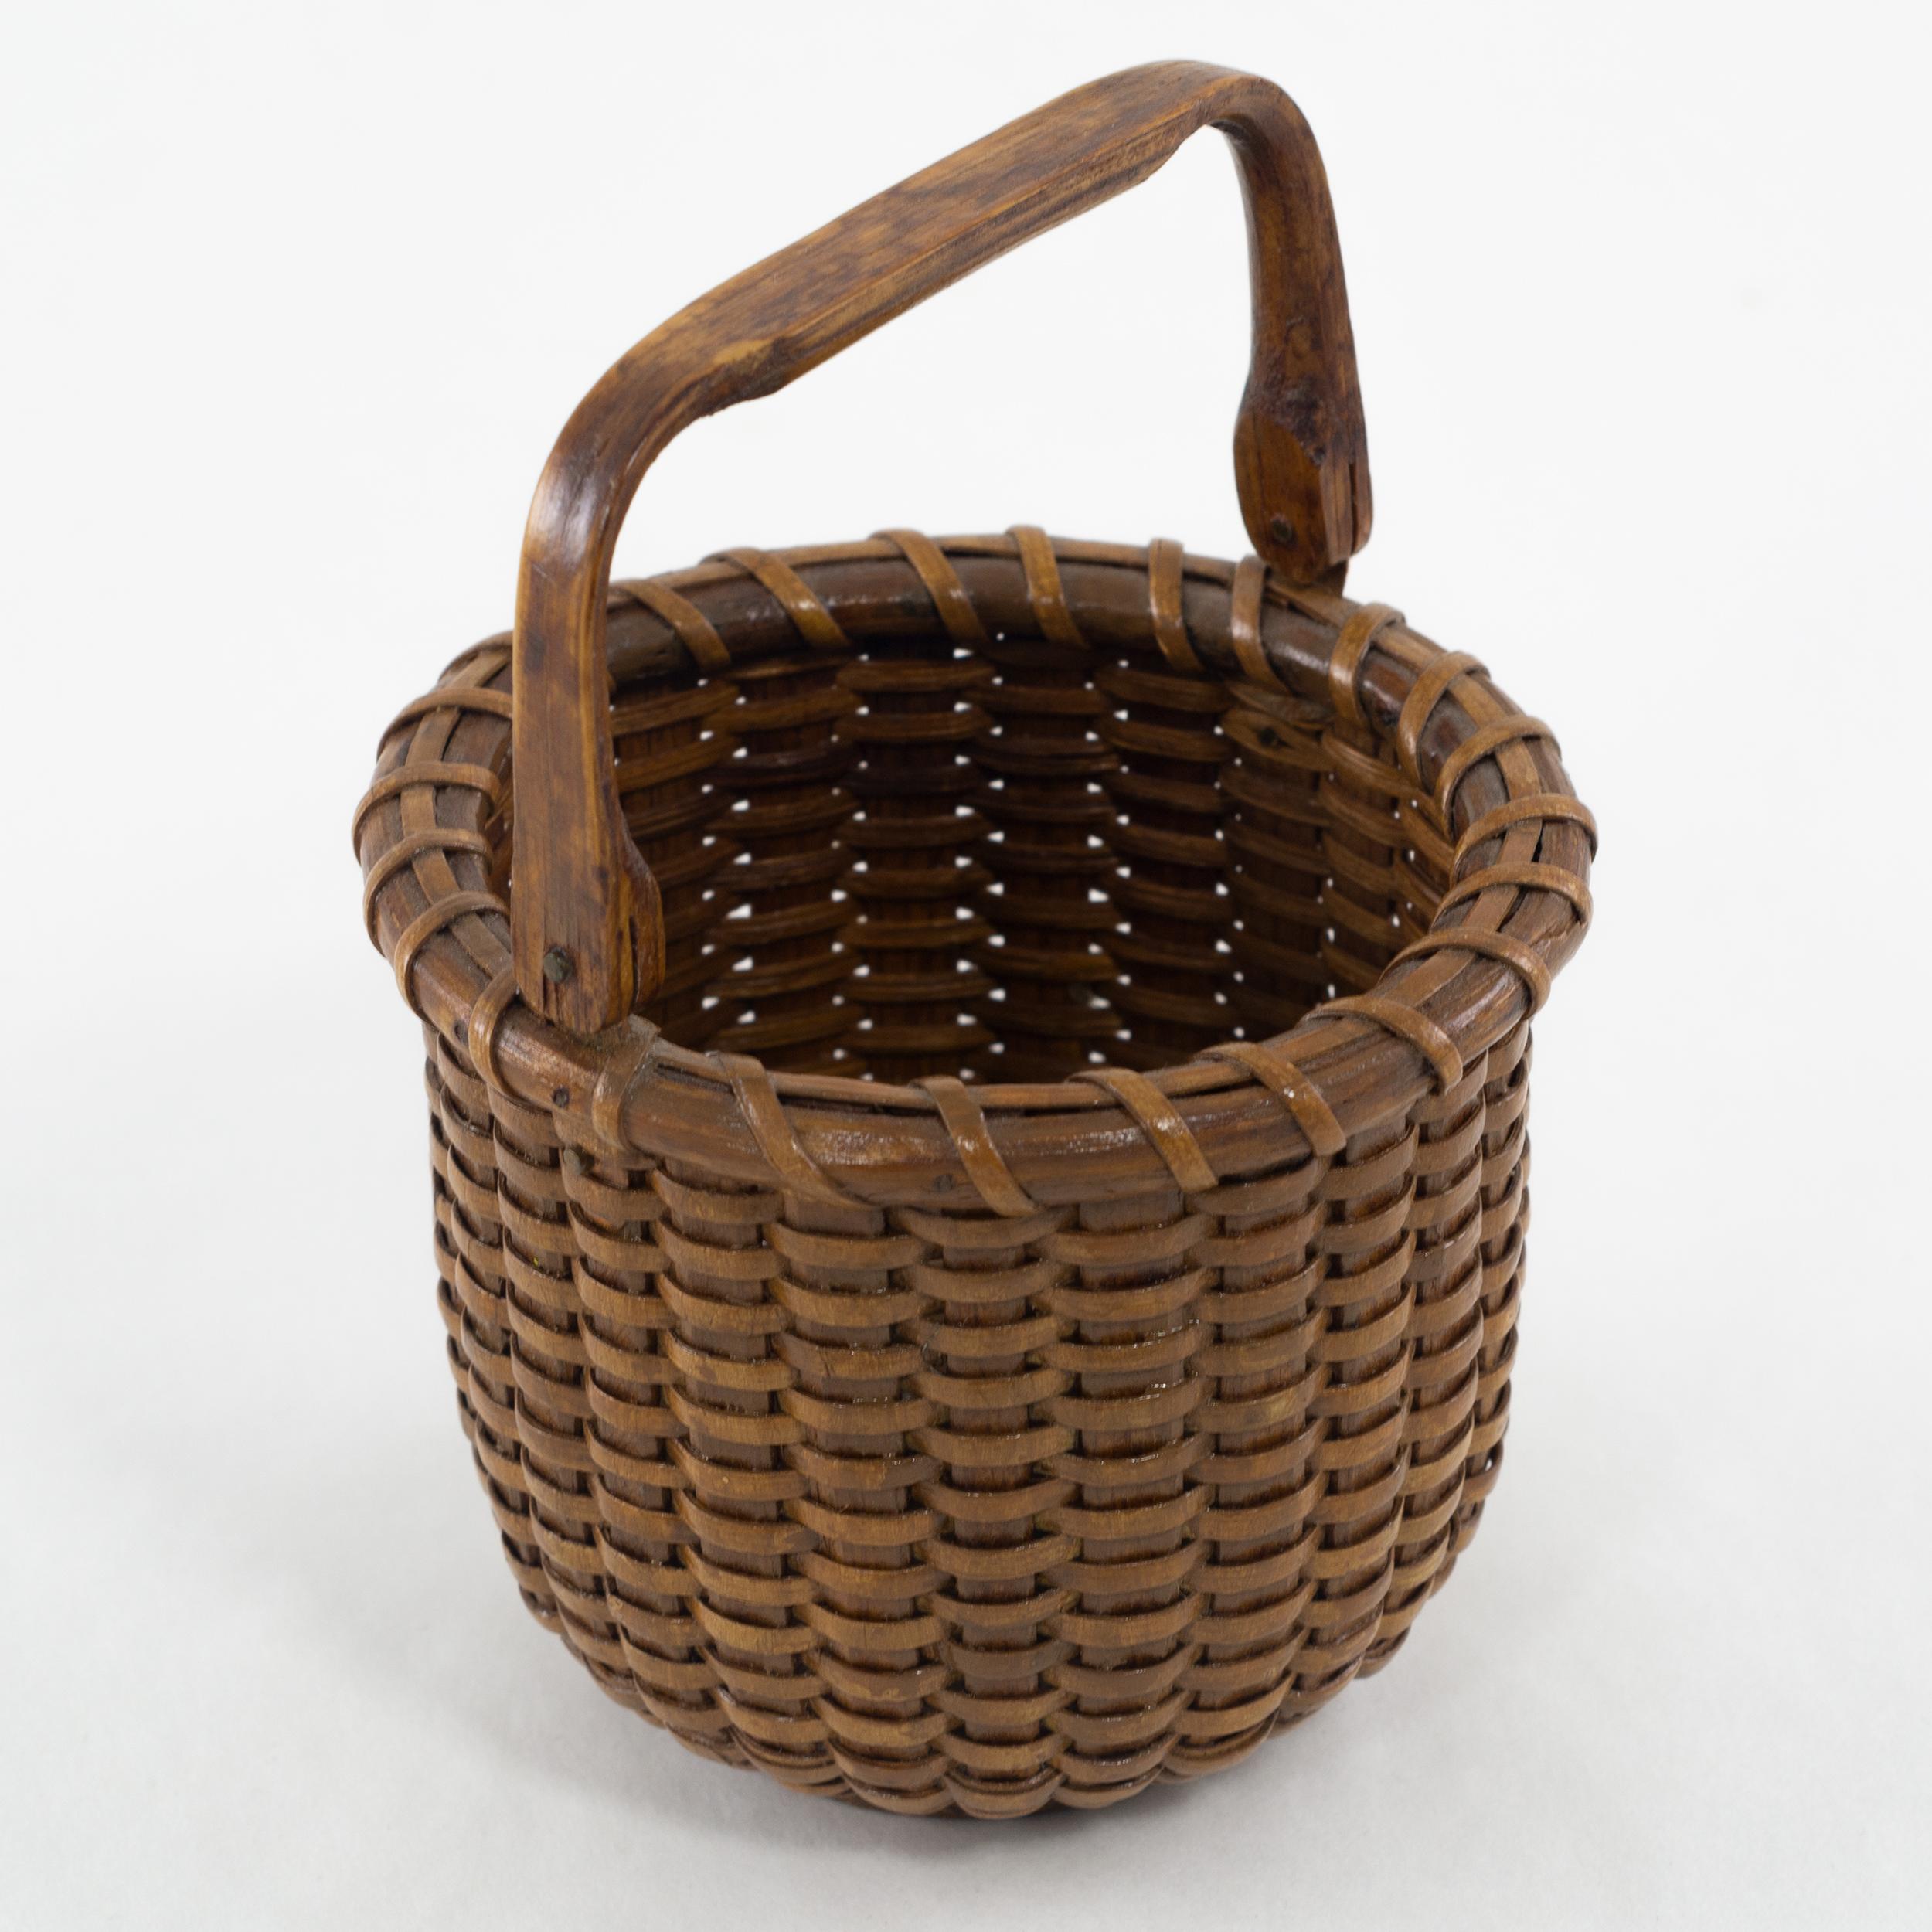 One egg Nantucket lightship basket in great condition with a rich honey patina. Constructed with Oak staves and swing handle, brass ears.
Unknown maker, circa 1940.